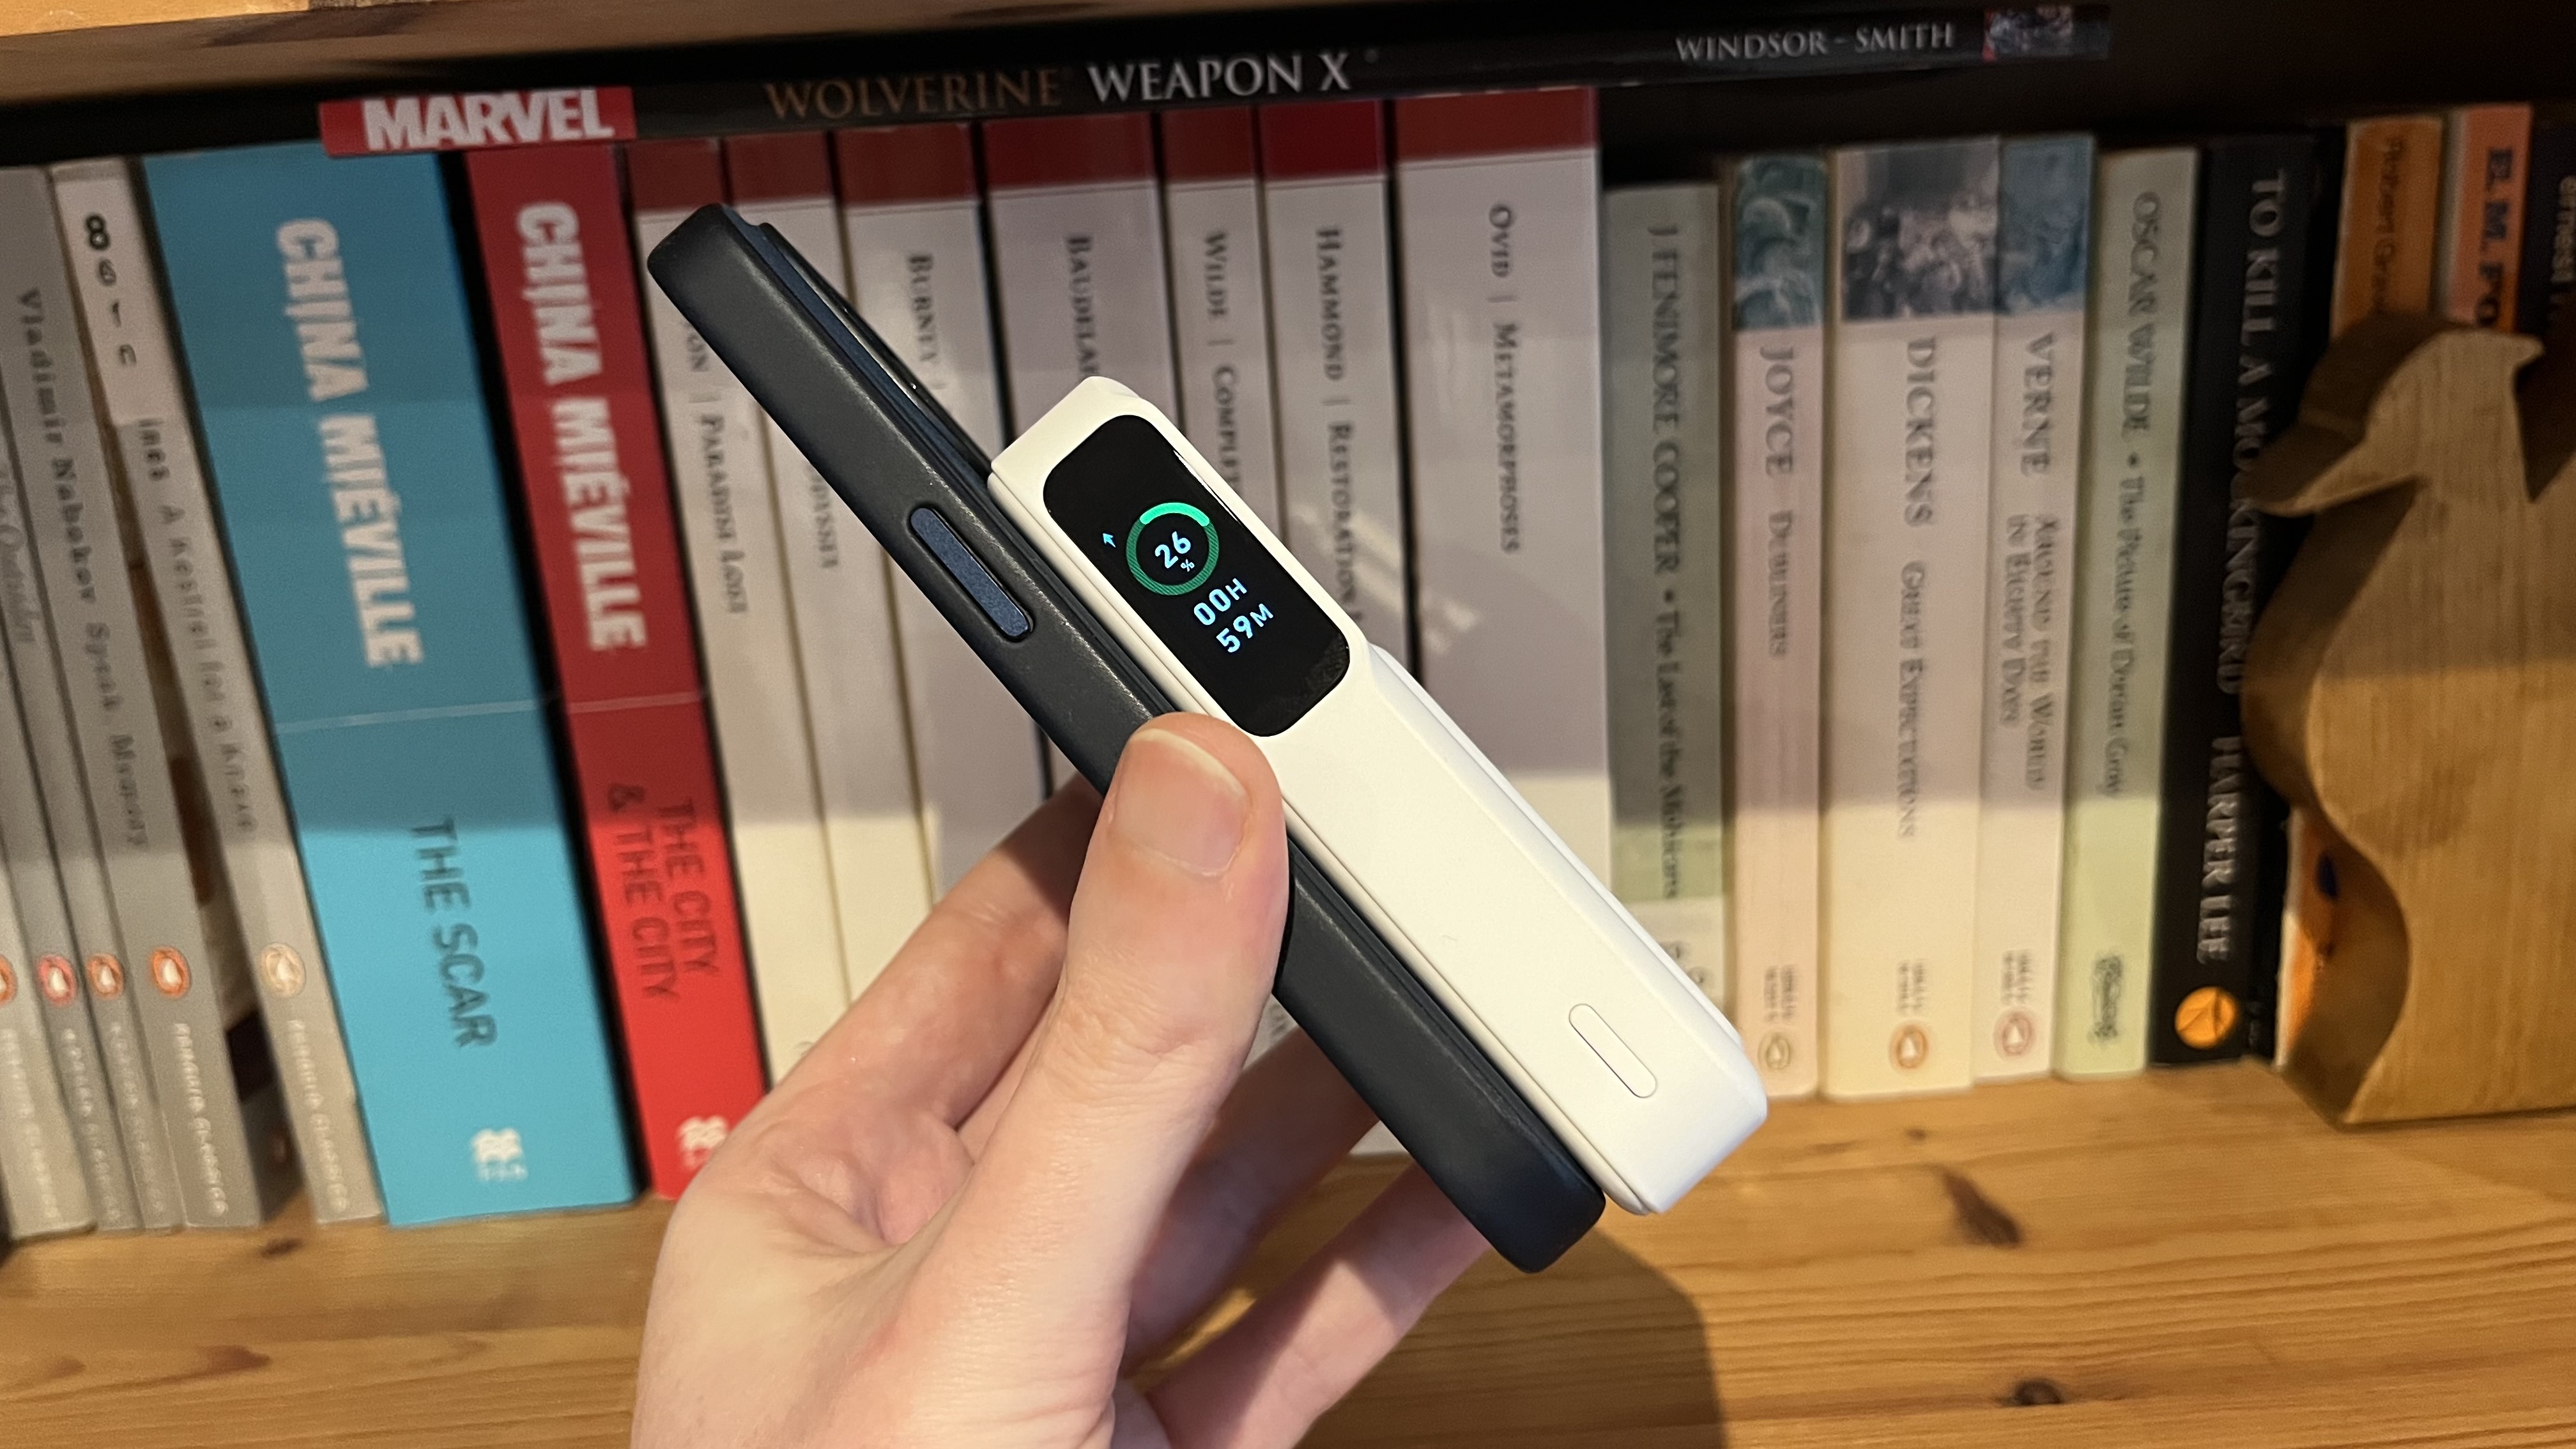 The Anker MagGo Power Bank (10K) connected to an iPhone 15 Pro on a wooden bookshelf